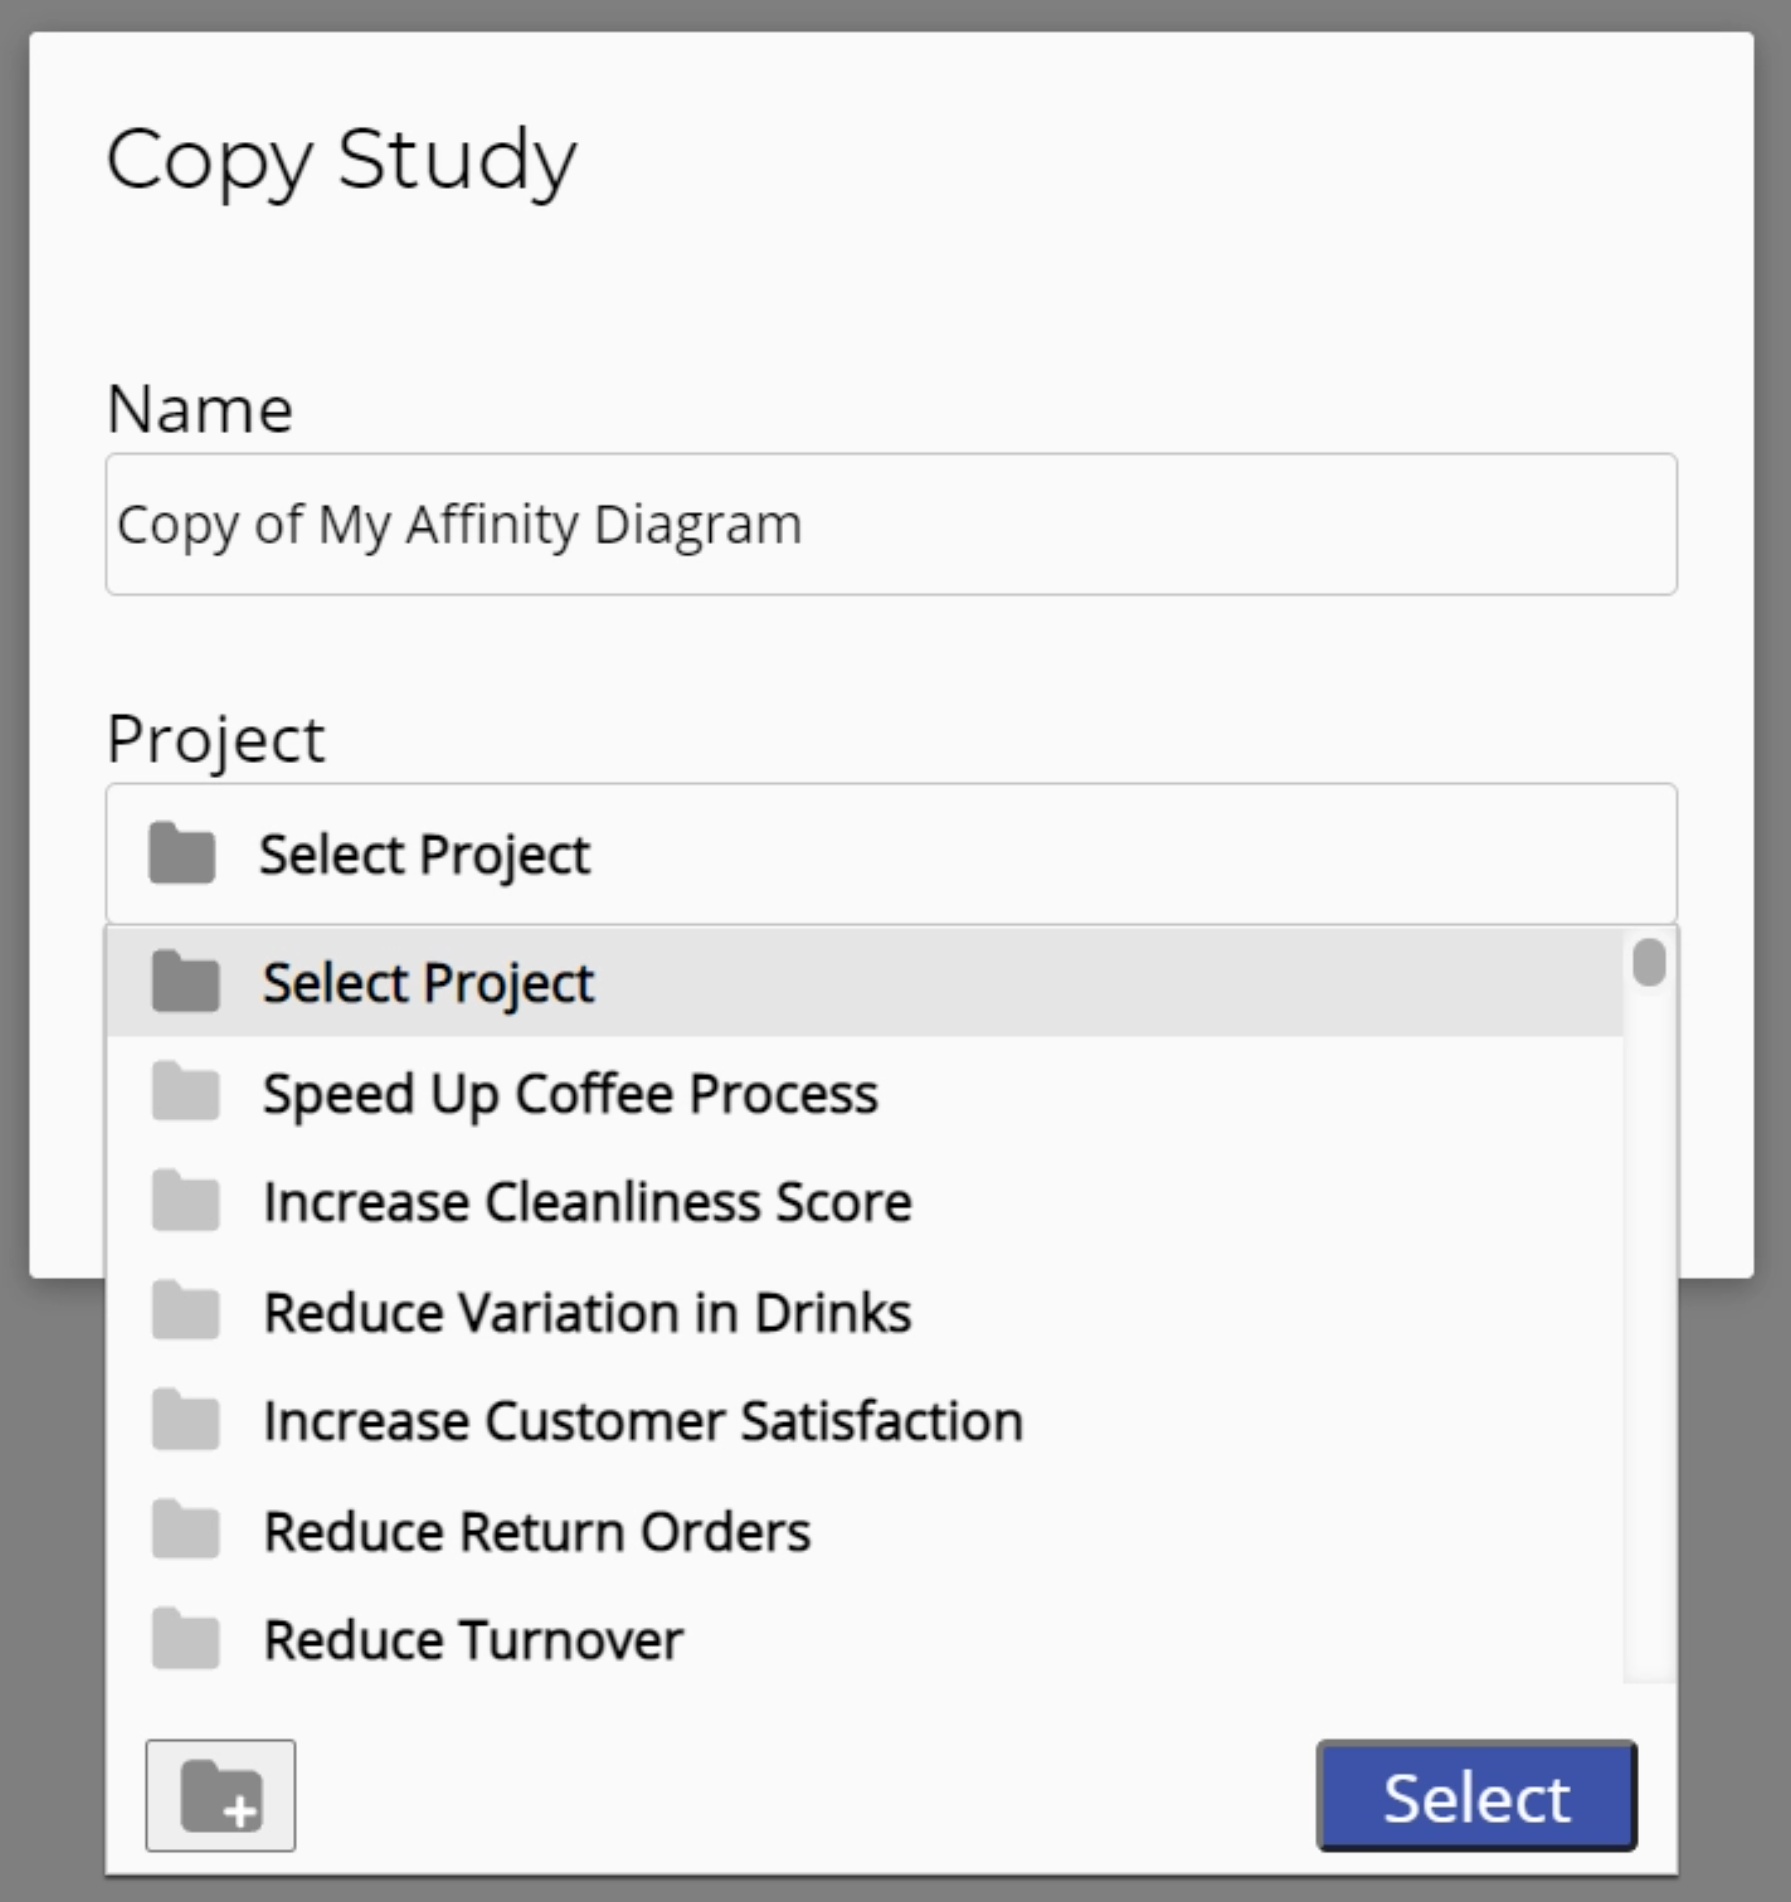 Choose a project from the dropdown.